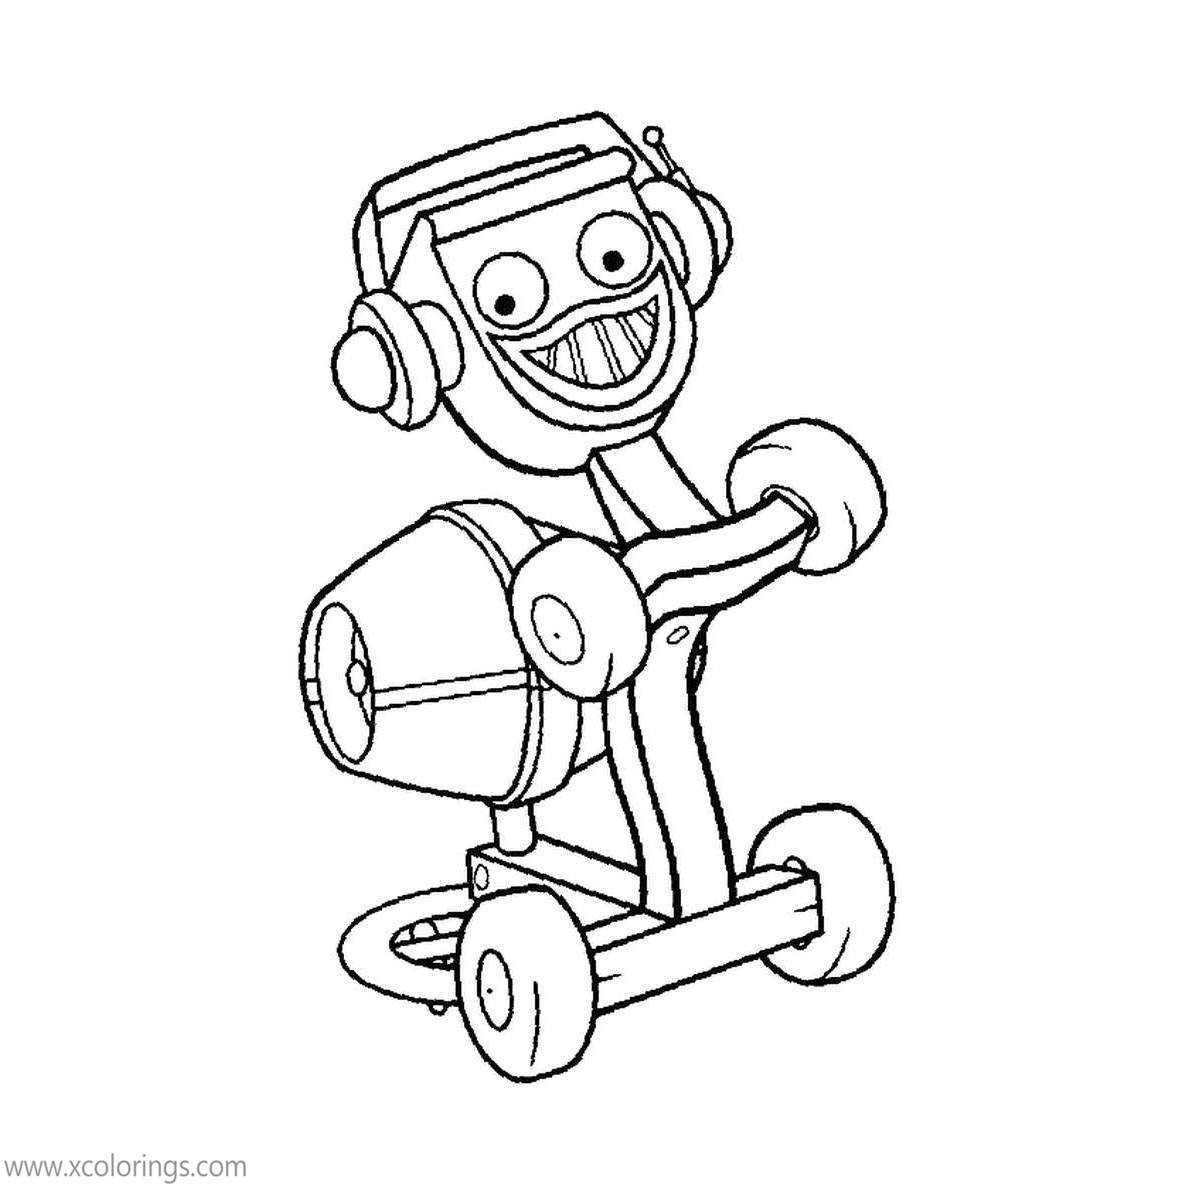 Free Bob The Builder Coloring Pages Dizzy printable